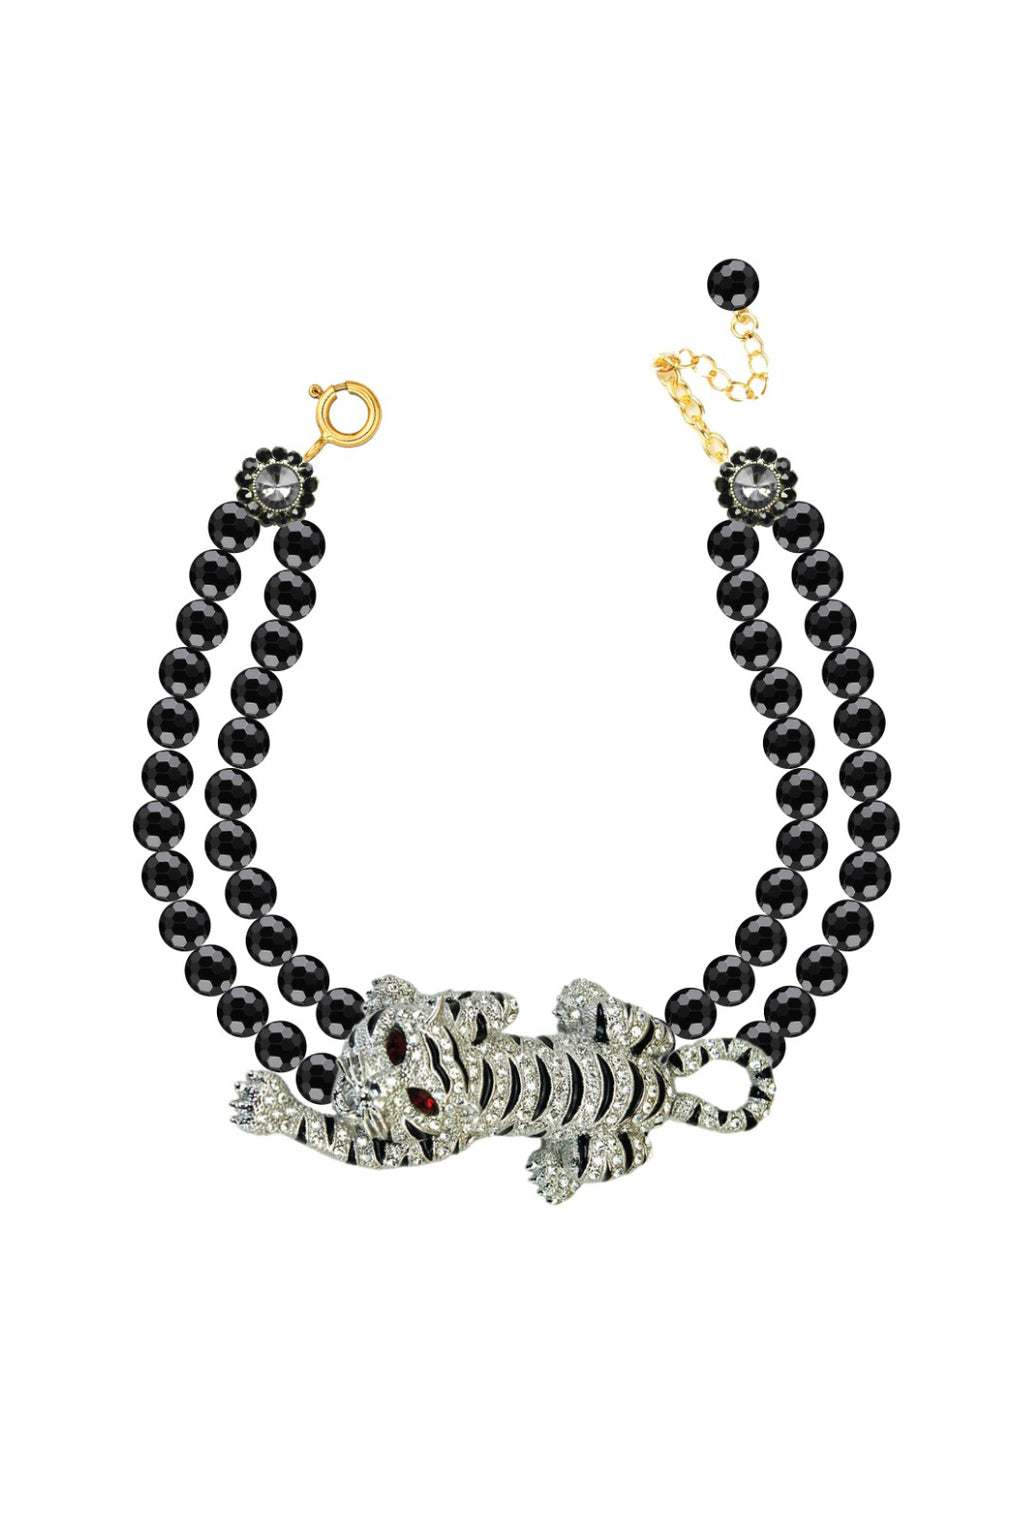 Agate beaded statement necklace with a glass crystal leopard pendant.